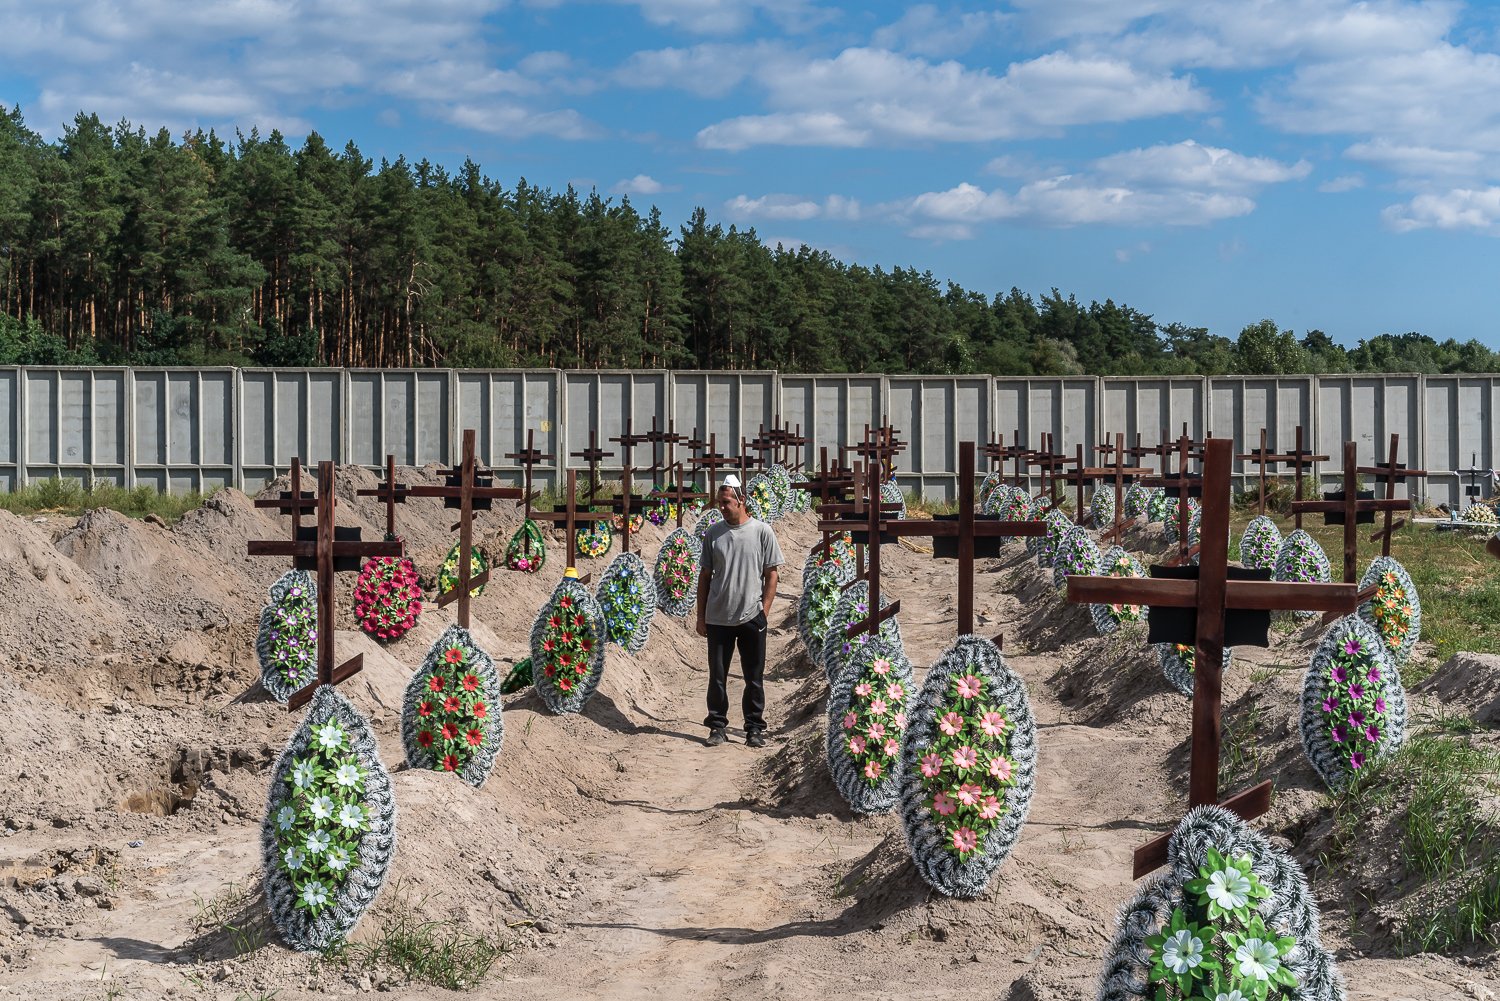  A cemetery worker stands amid the graves of unidentified civilian victims of the Russian invasion and occupation discovered nearby at the Bucha City Cemetery on Friday, September 2, 2022 in Bucha, Ukraine. 